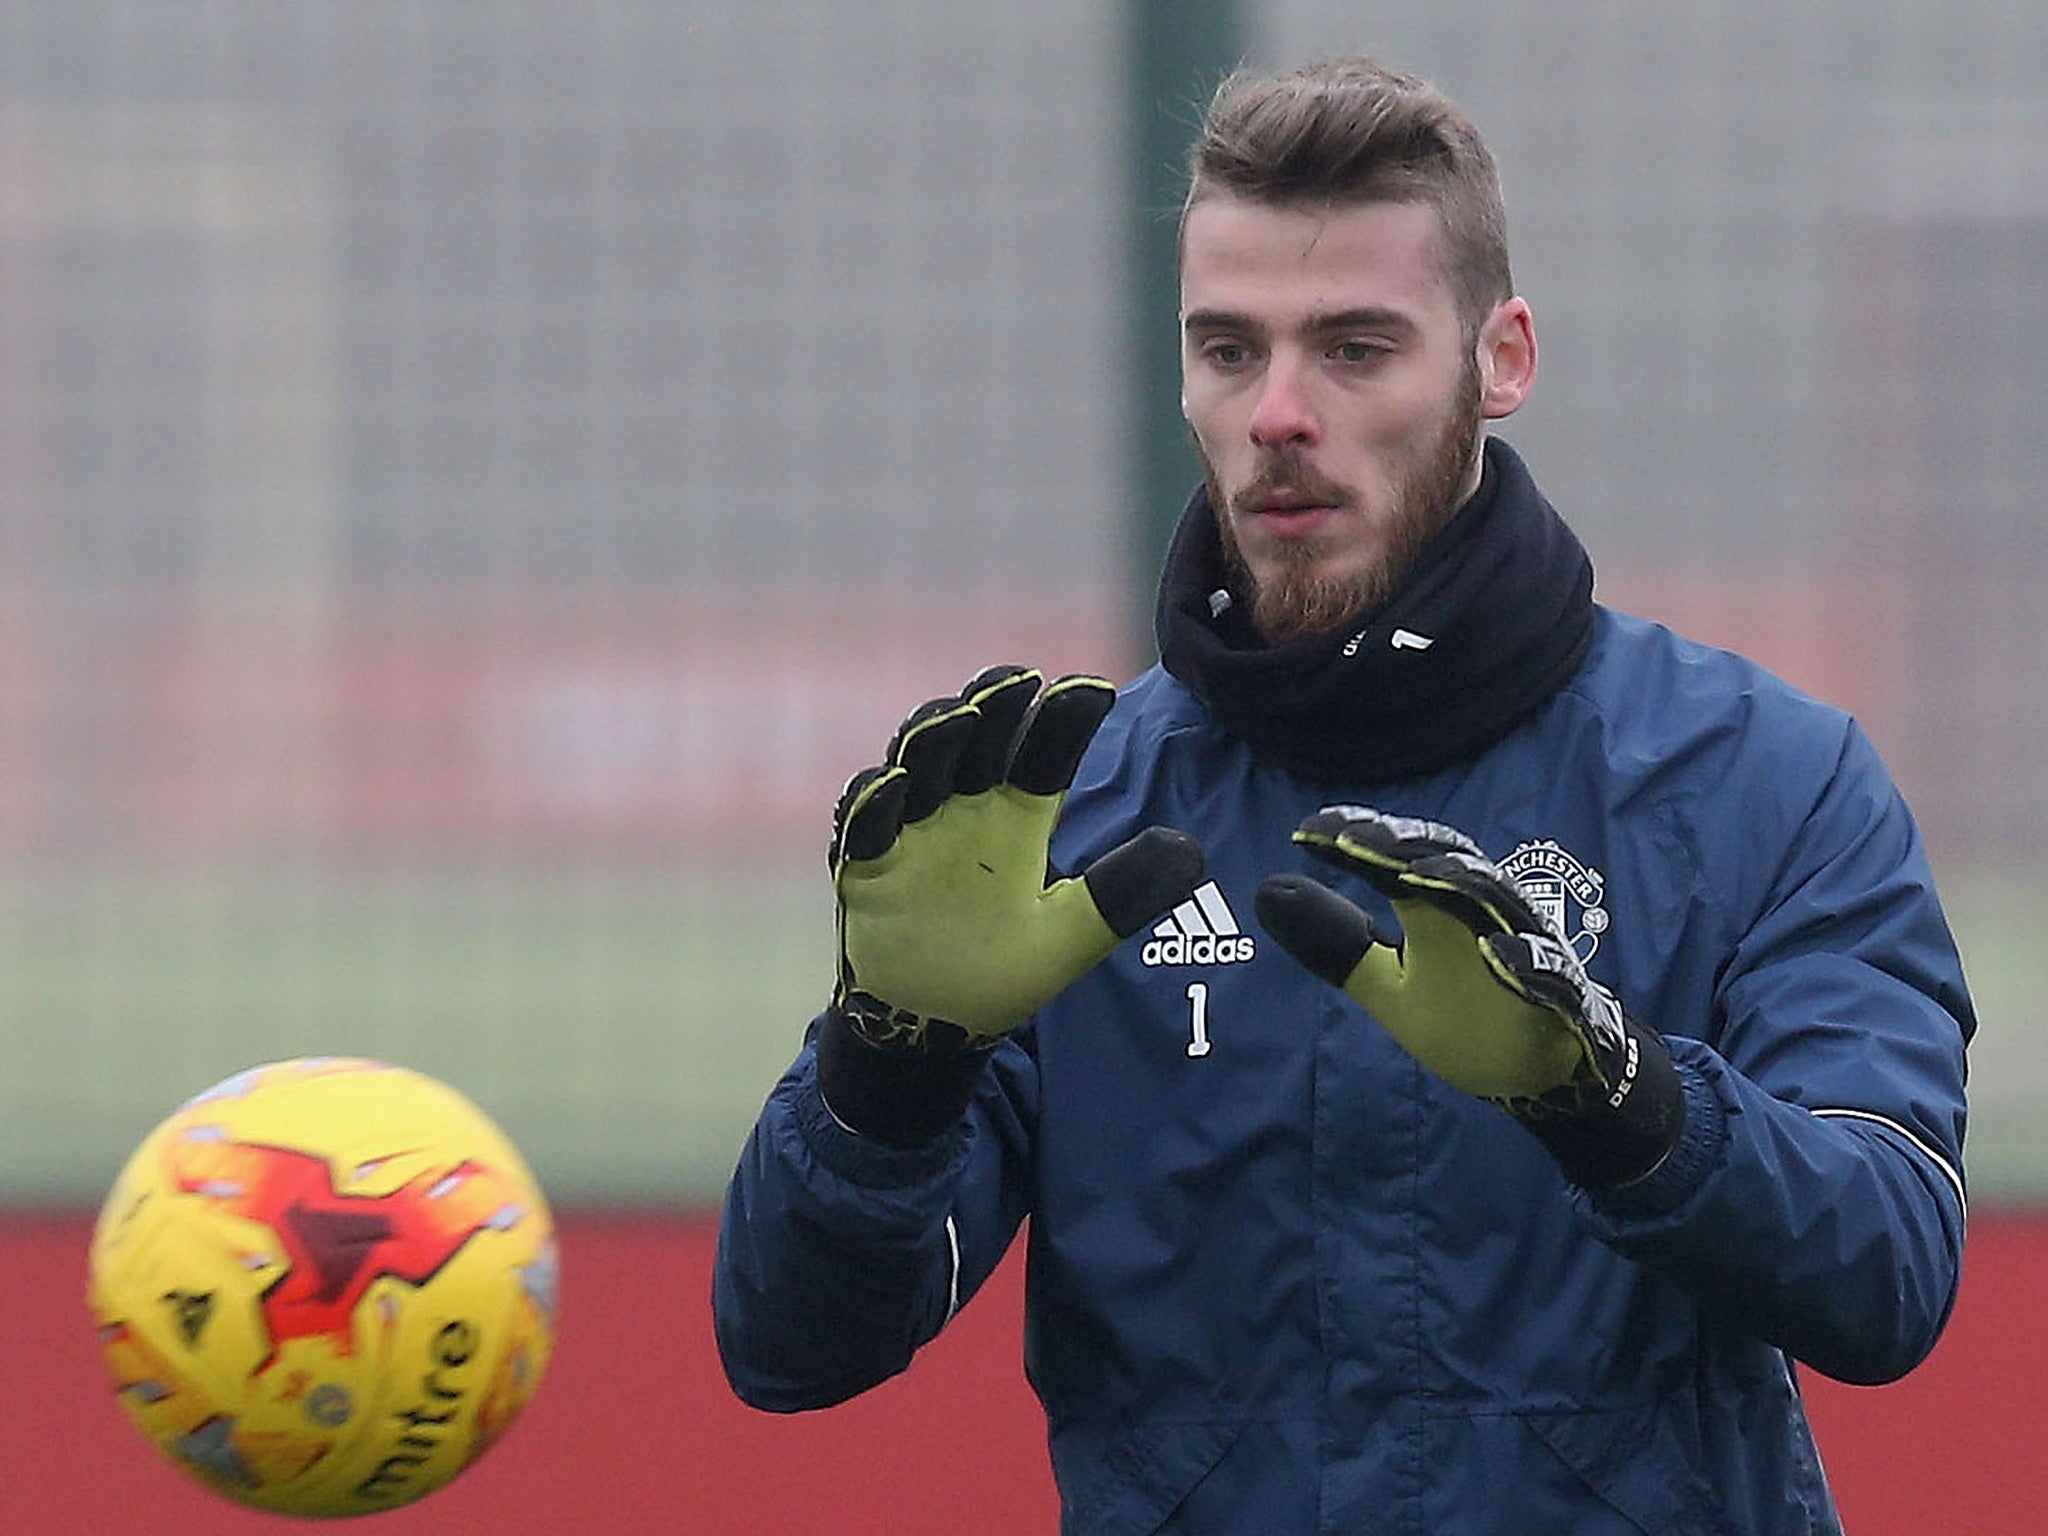 Real Madrid launch 'operation' to sign Manchester United David De Gea